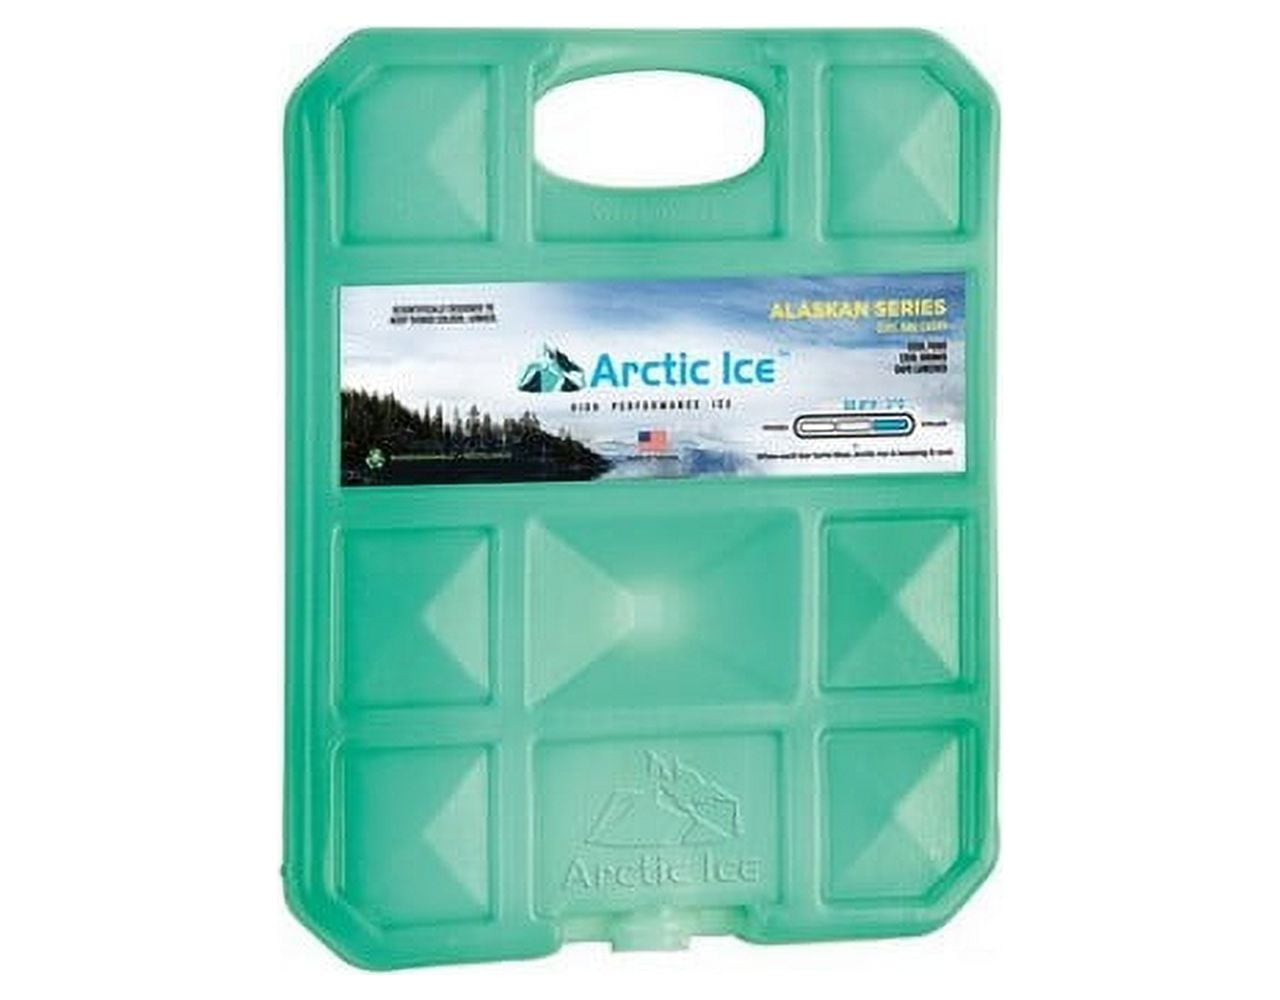 Ice Cube Freezer Bags 30 Bags Makes 840 Ice Cubes 28 Cubes Per Bag  5053249233246